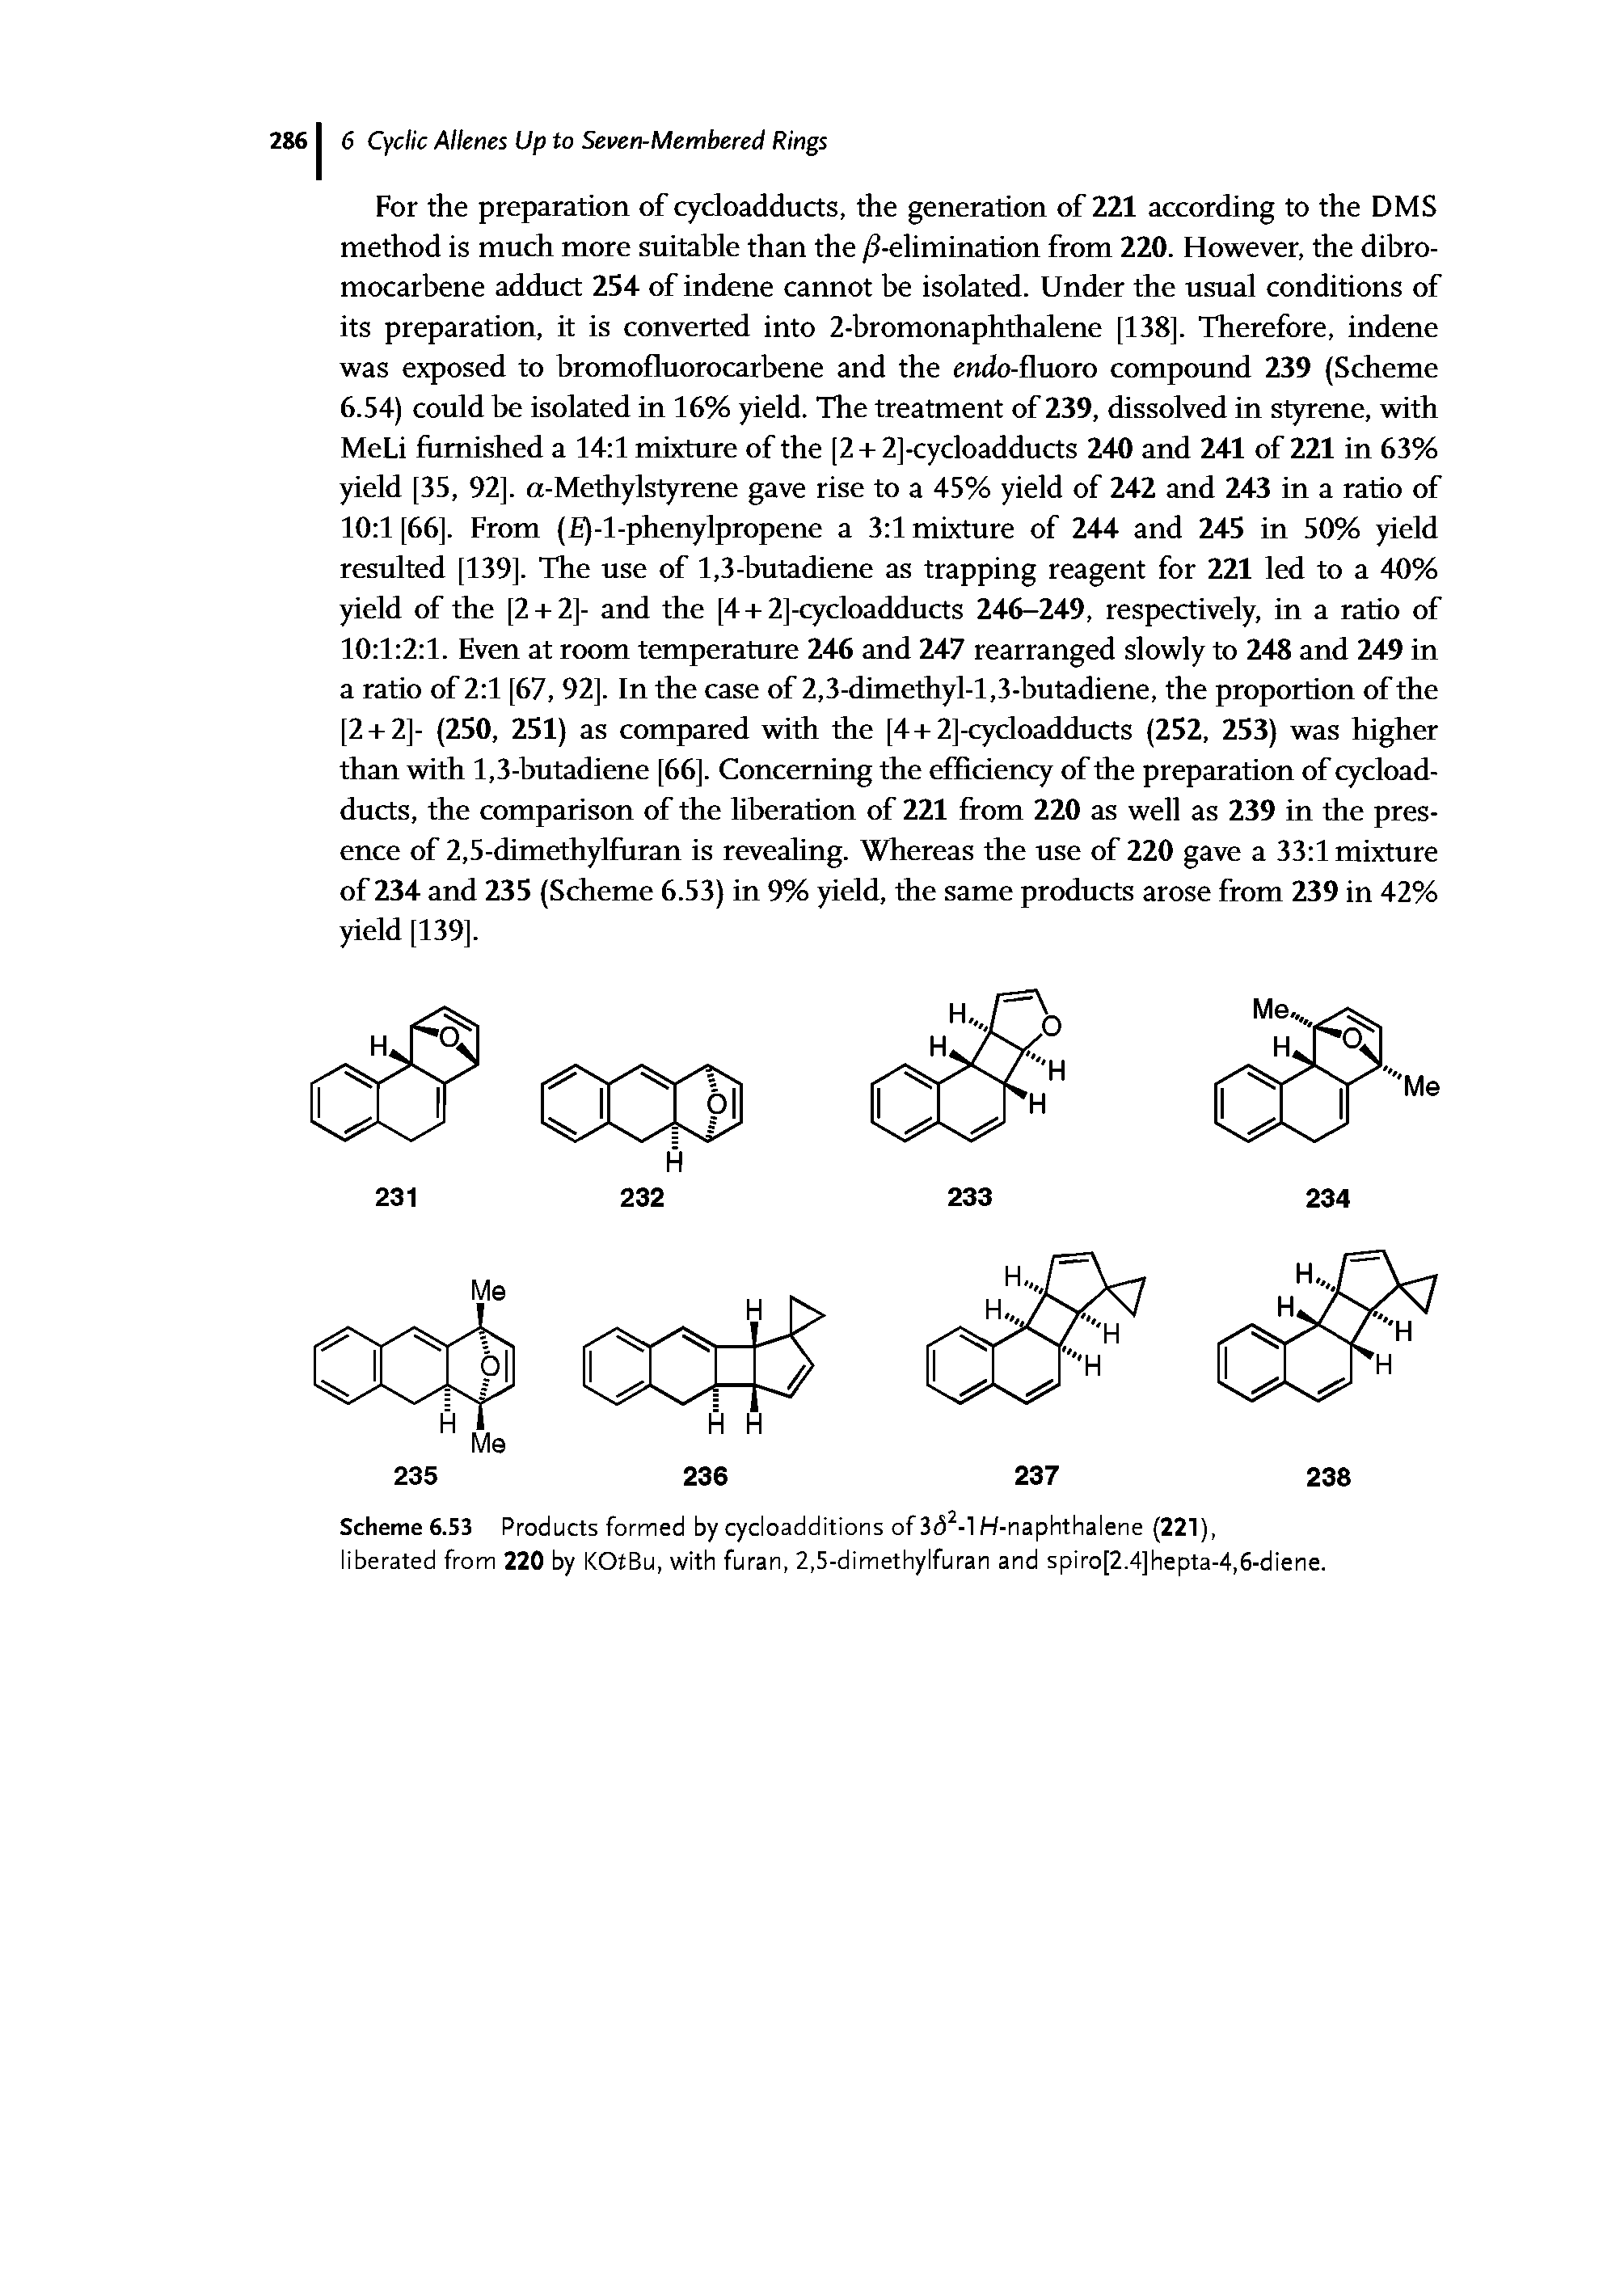 Scheme 6.53 Products formed by cycloadditions of 3<52-l H-naphthalene (221), liberated from 220 by KOtBu, with furan, 2,5-dimethylfuran and spiro[2.4]hepta-4,6-diene.